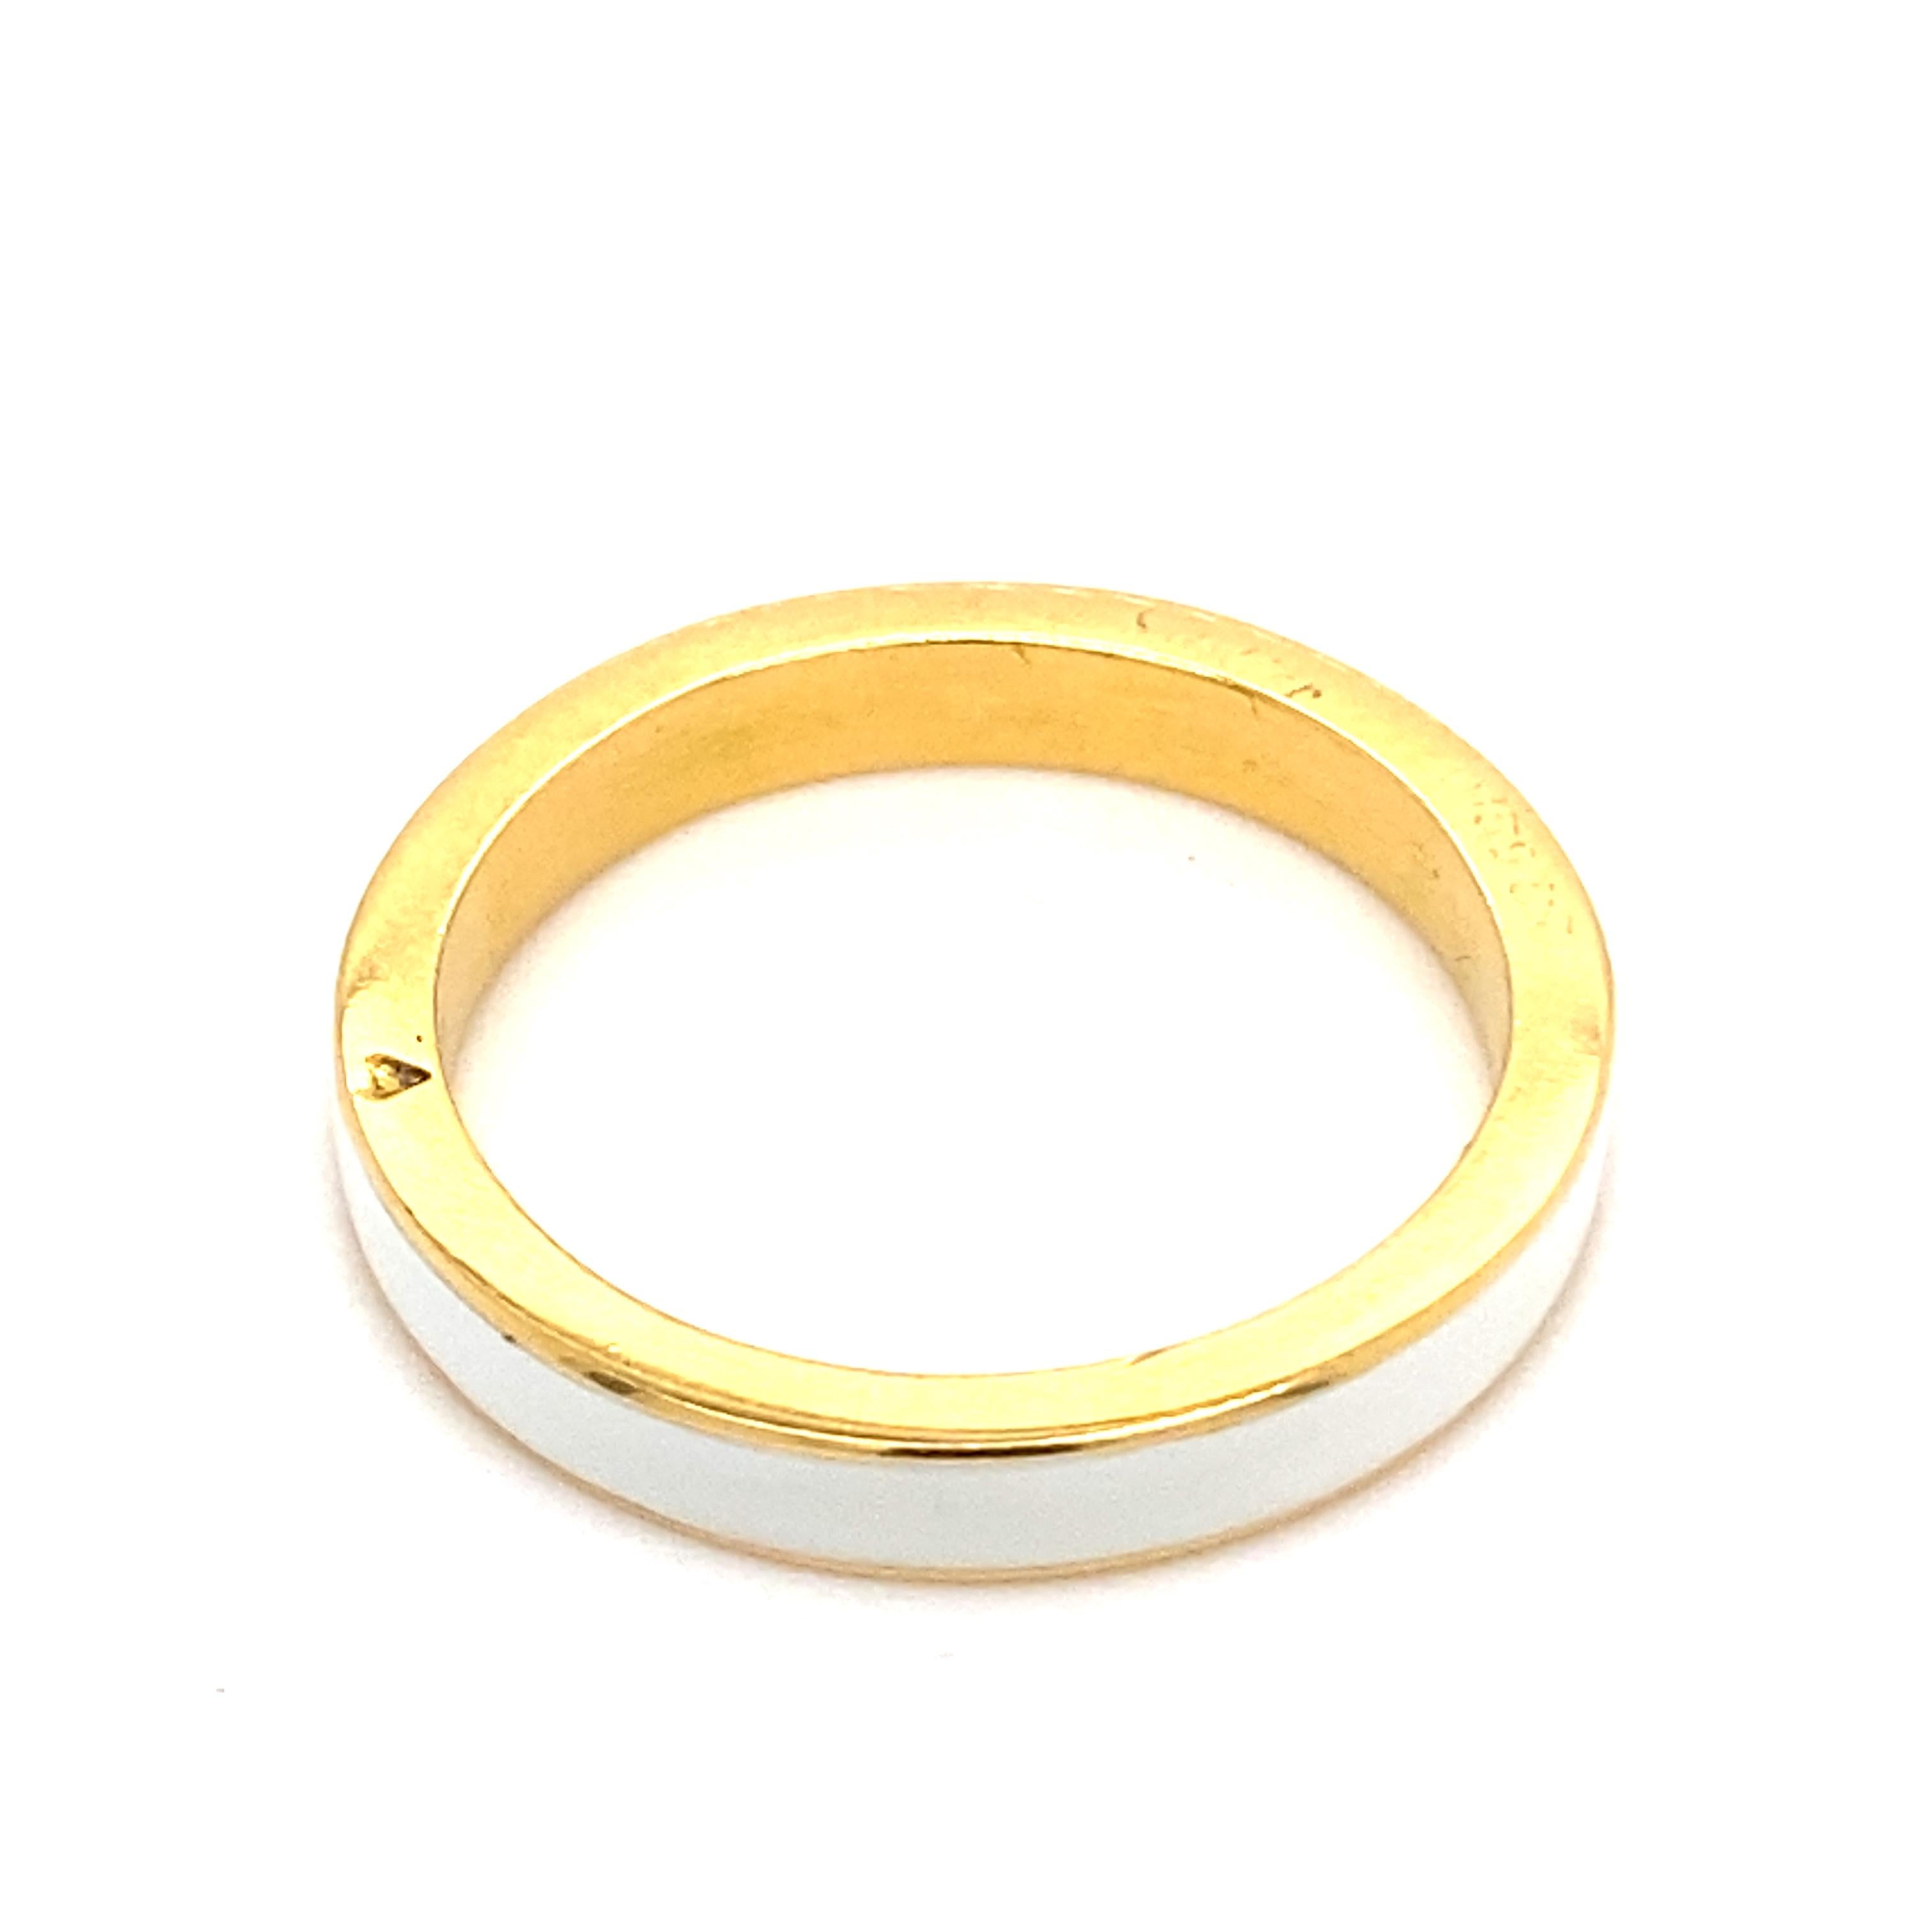 A vintage Cartier white enamel 18 karat yellow gold band, circa 1960.

Designed as a simple 18 karat yellow gold band with a ring of white guilloche enamel to its centre.

A beautifully elegant ring, that can be worn on its own or as part of a